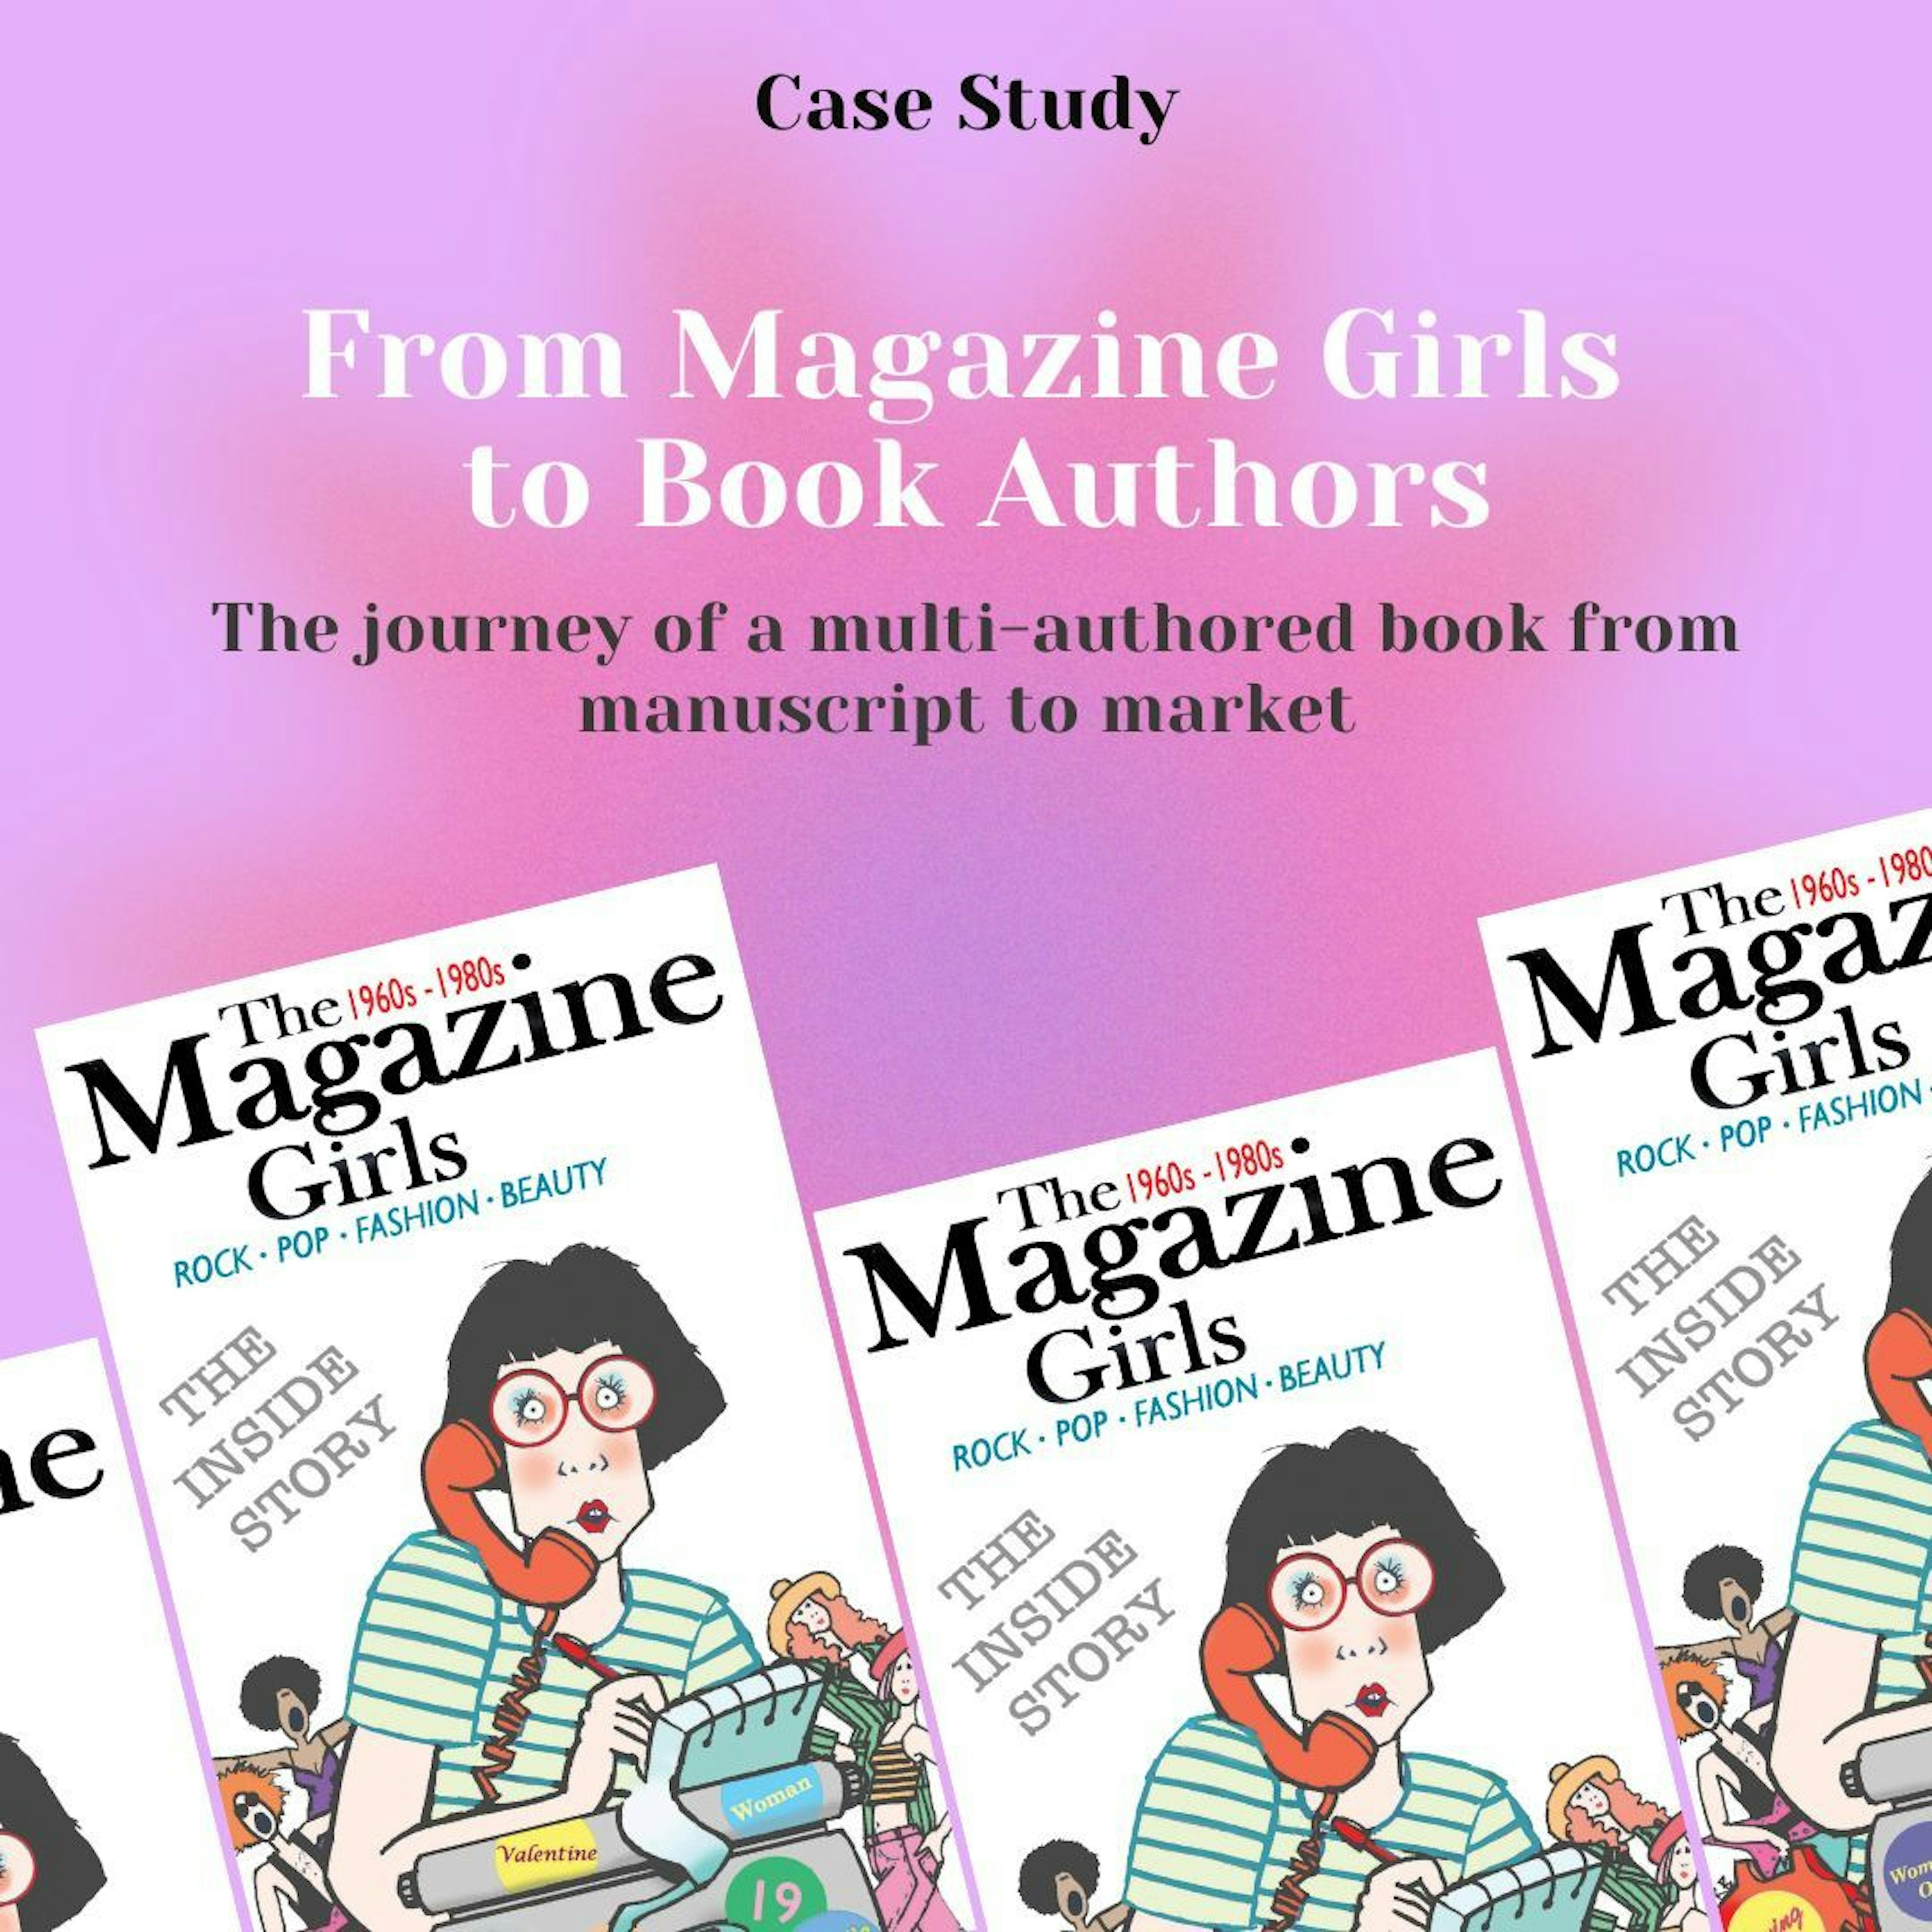 From The Magazine Girls to book authors: our journey to publication